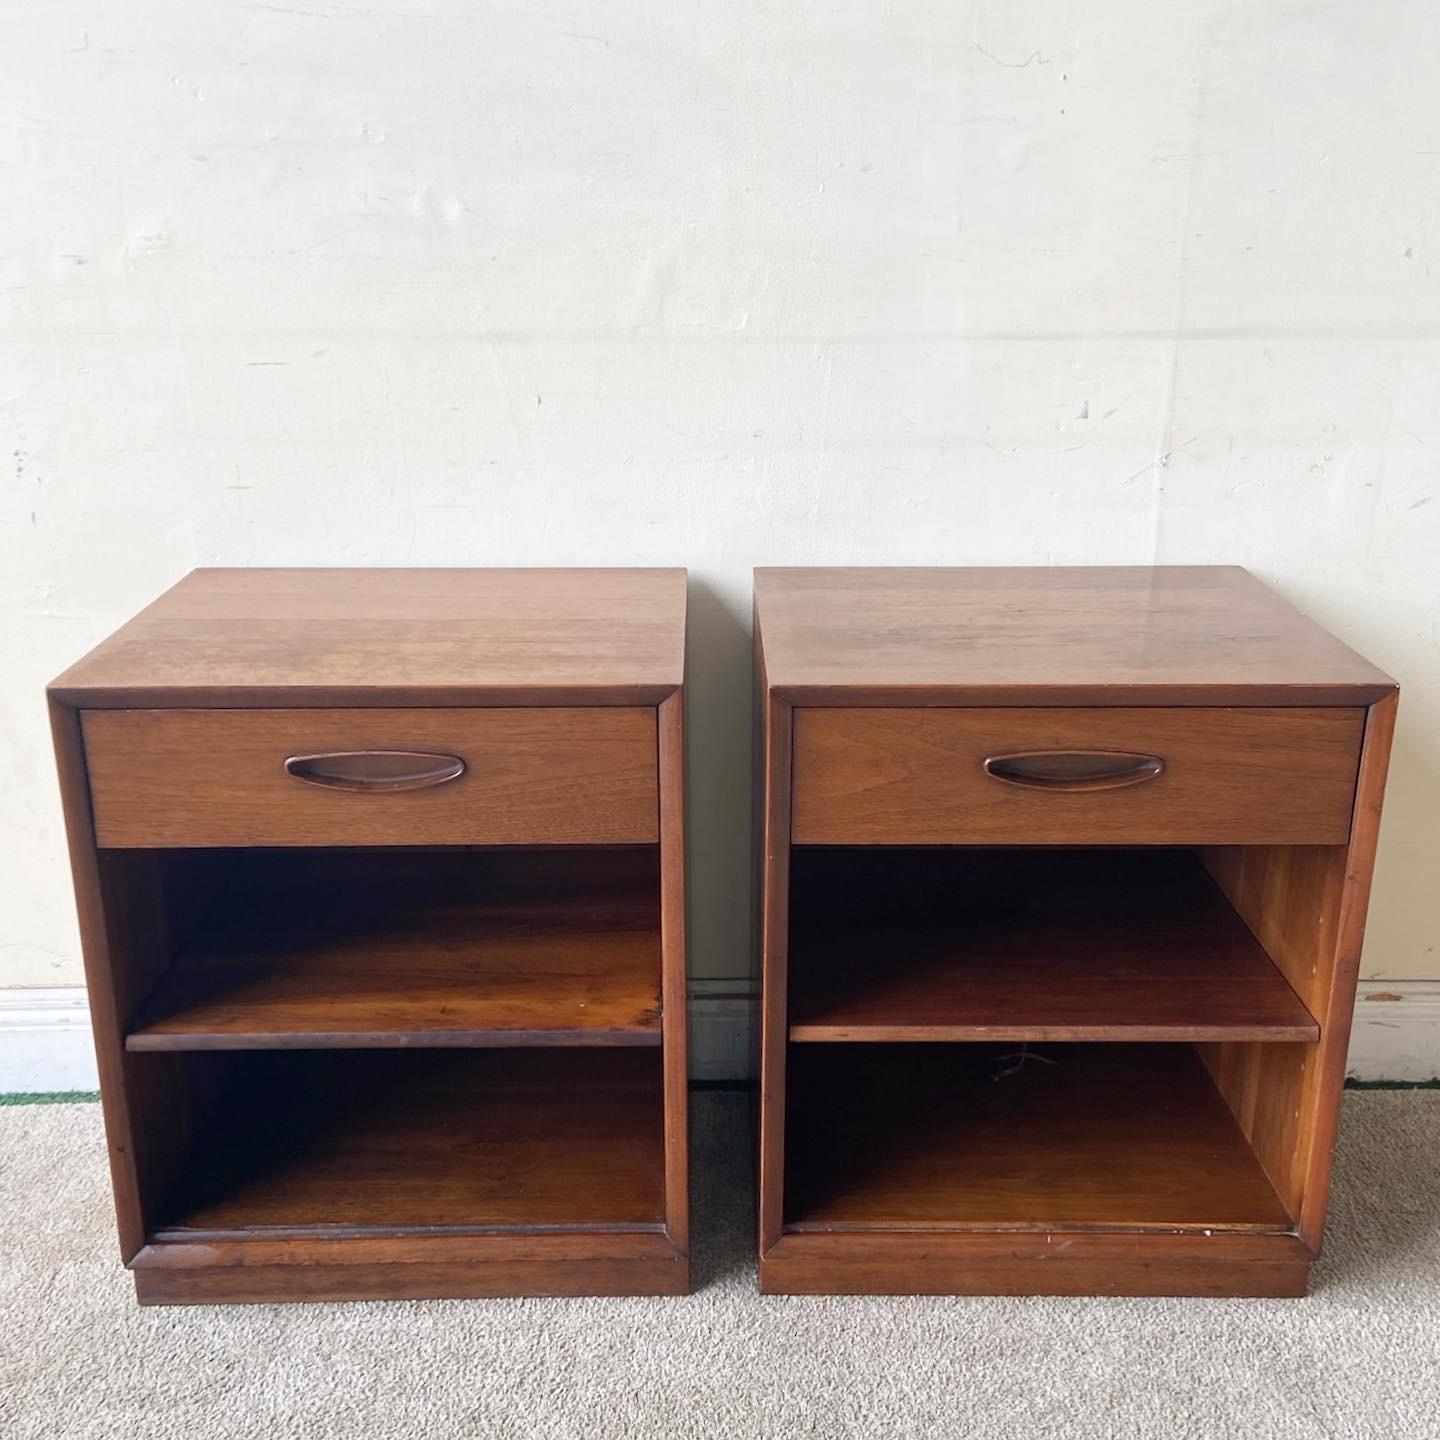 Exceptional pair of Mid-Century Modern nightstands by Henredon. Each features one spacious drawer with an inlaid handle.
 